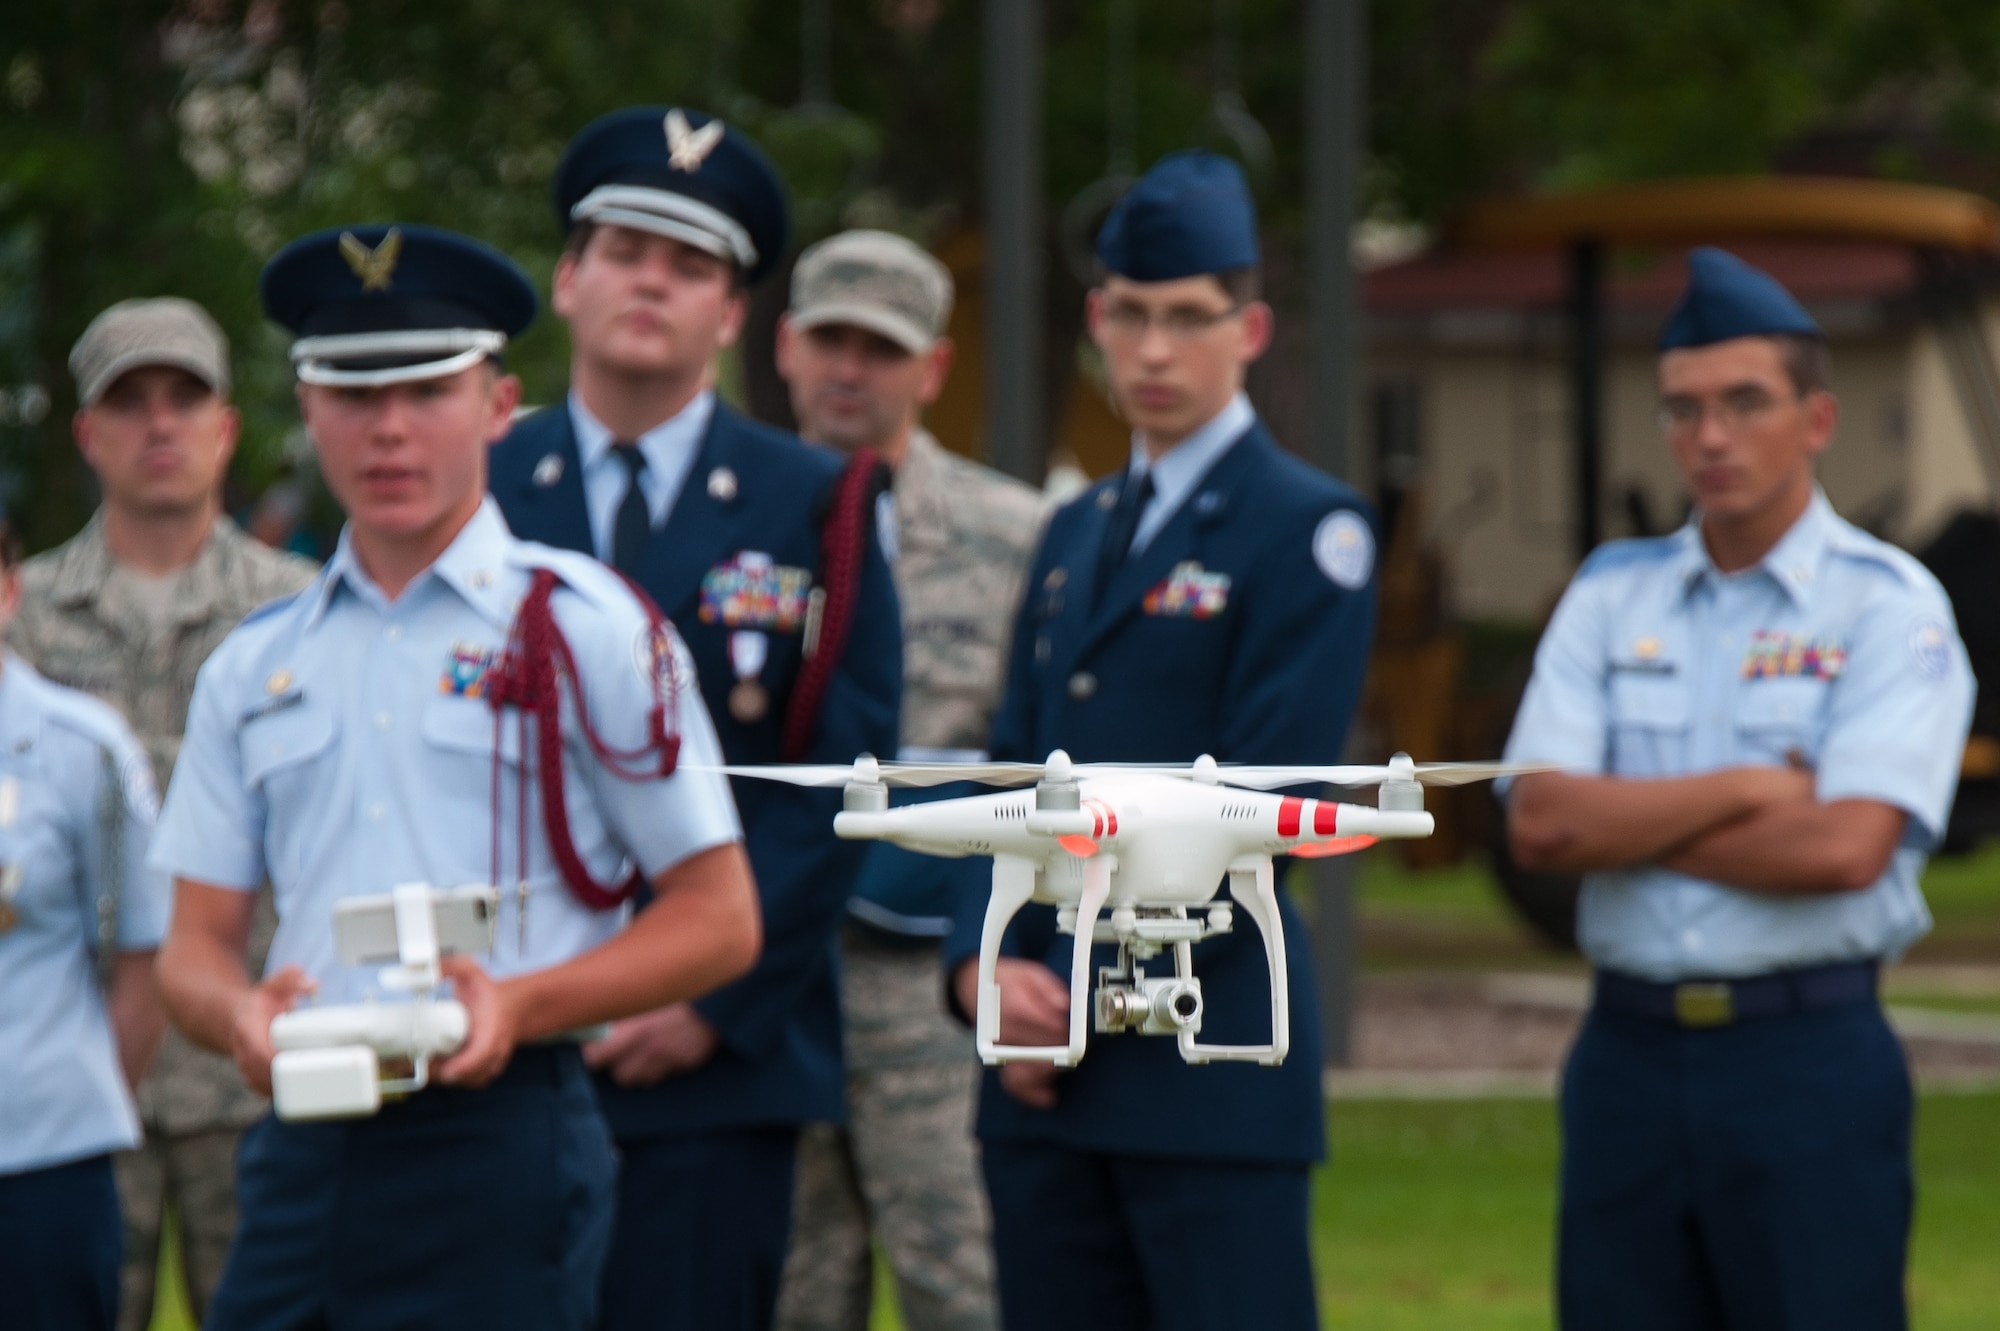 Cadet Senior Airman Cody Powell, Niceville High School Junior Reserve Officer Training Corps, maneuvers a multicopter during a demonstration held at Maxwell Air Force Base, Alabama, June 10, 2015.  About 17 cadets from the Florida high school were at Maxwell to demonstrate the capabilities of their newest science, technology, engineering and mathematics, or STEM, teaching and learning tool they call the multicopter, or quadcopter, a remote-controlled aircraft propelled by four rotors. Cadets learn how to fly the multicopter and maneuver its camera while also learning how to work in a team environment.  (Air Force Photo by Melanie Rodgers Cox/Cleared)